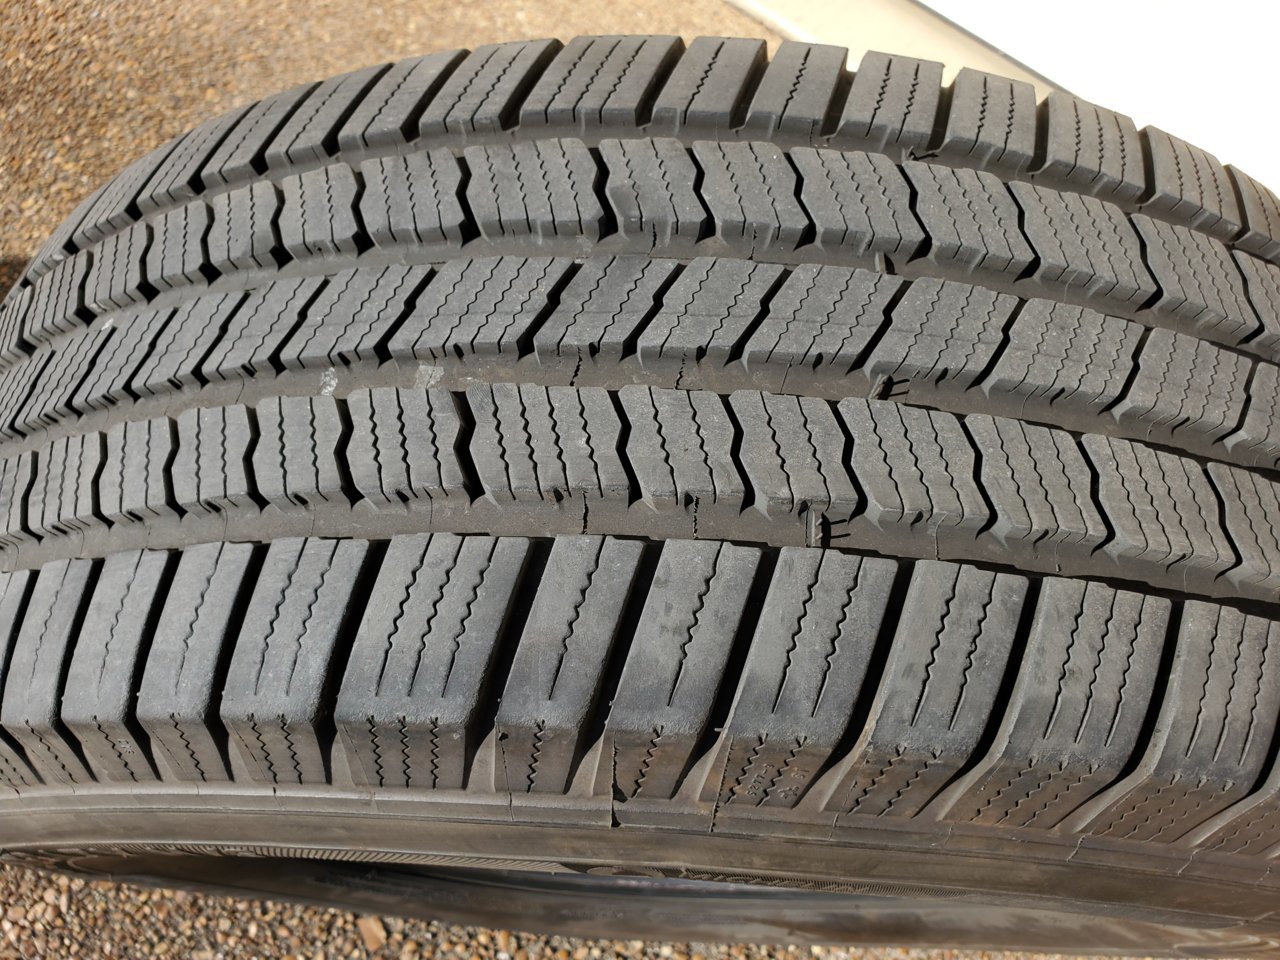 sold-4-michelin-defender-m-s-tires-275-65-r18-350-toyota-tundra-forum